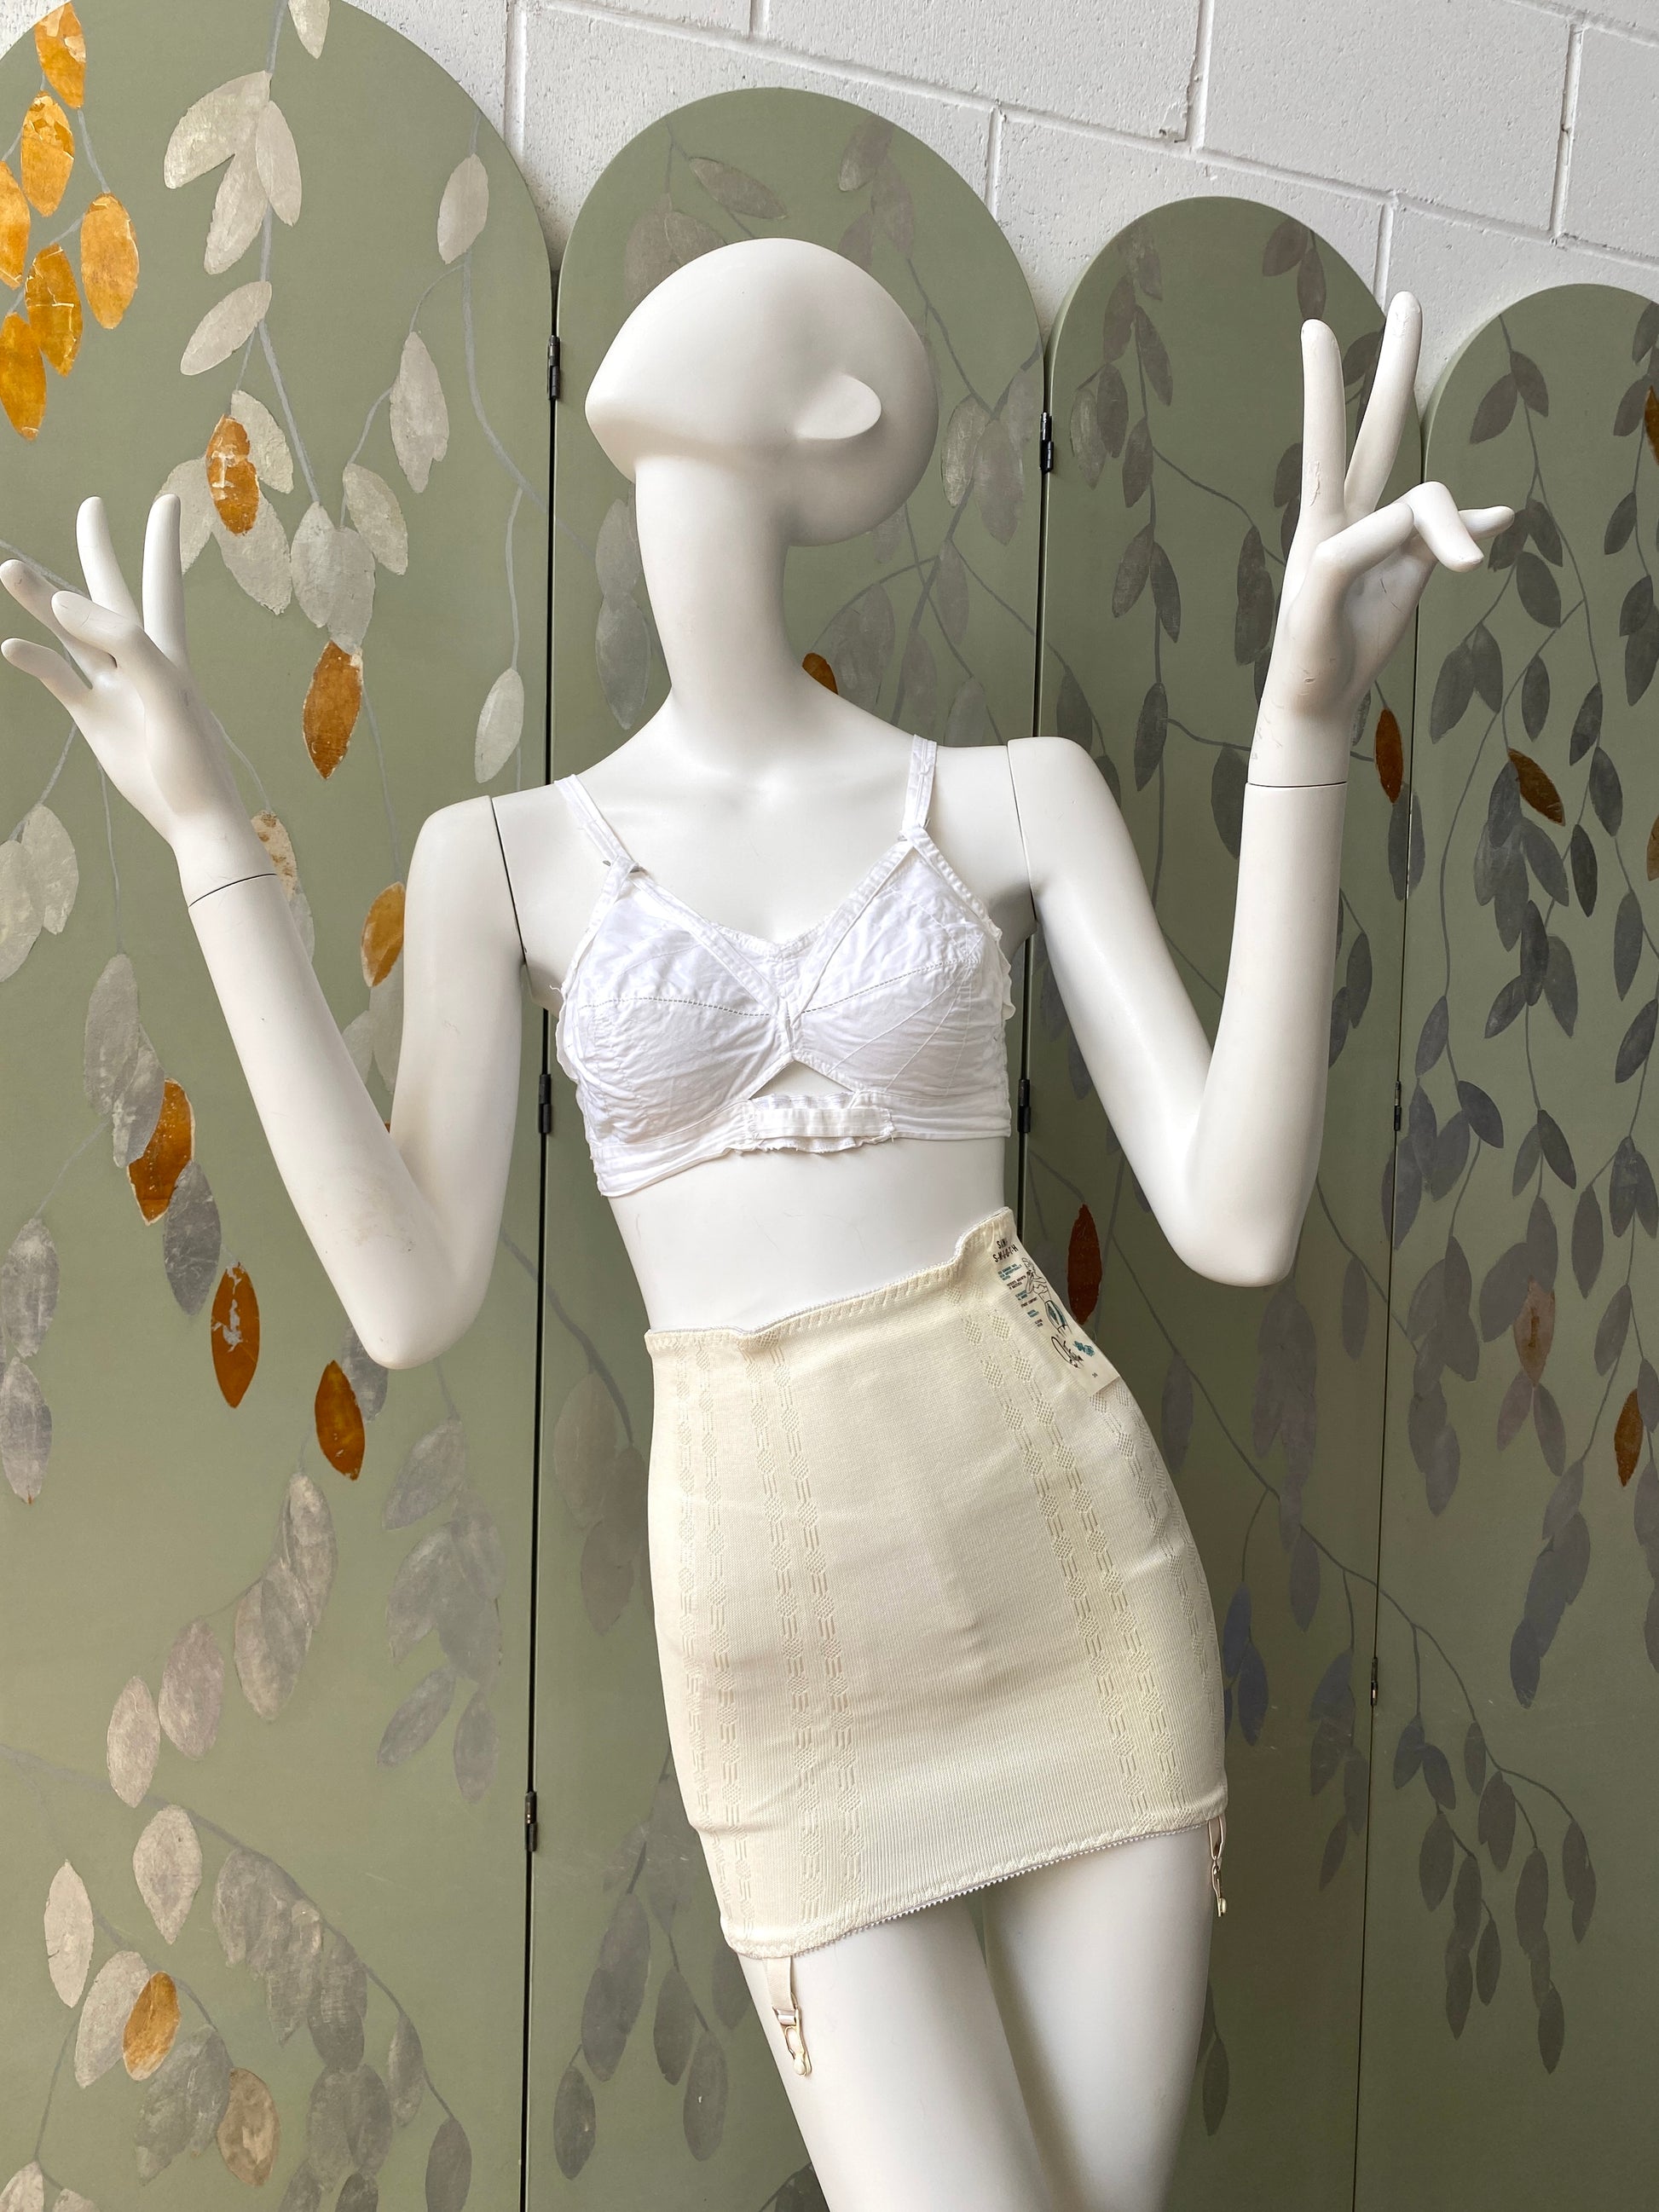 Wholesale Vintage Girdle To Create Slim And Fit Looking